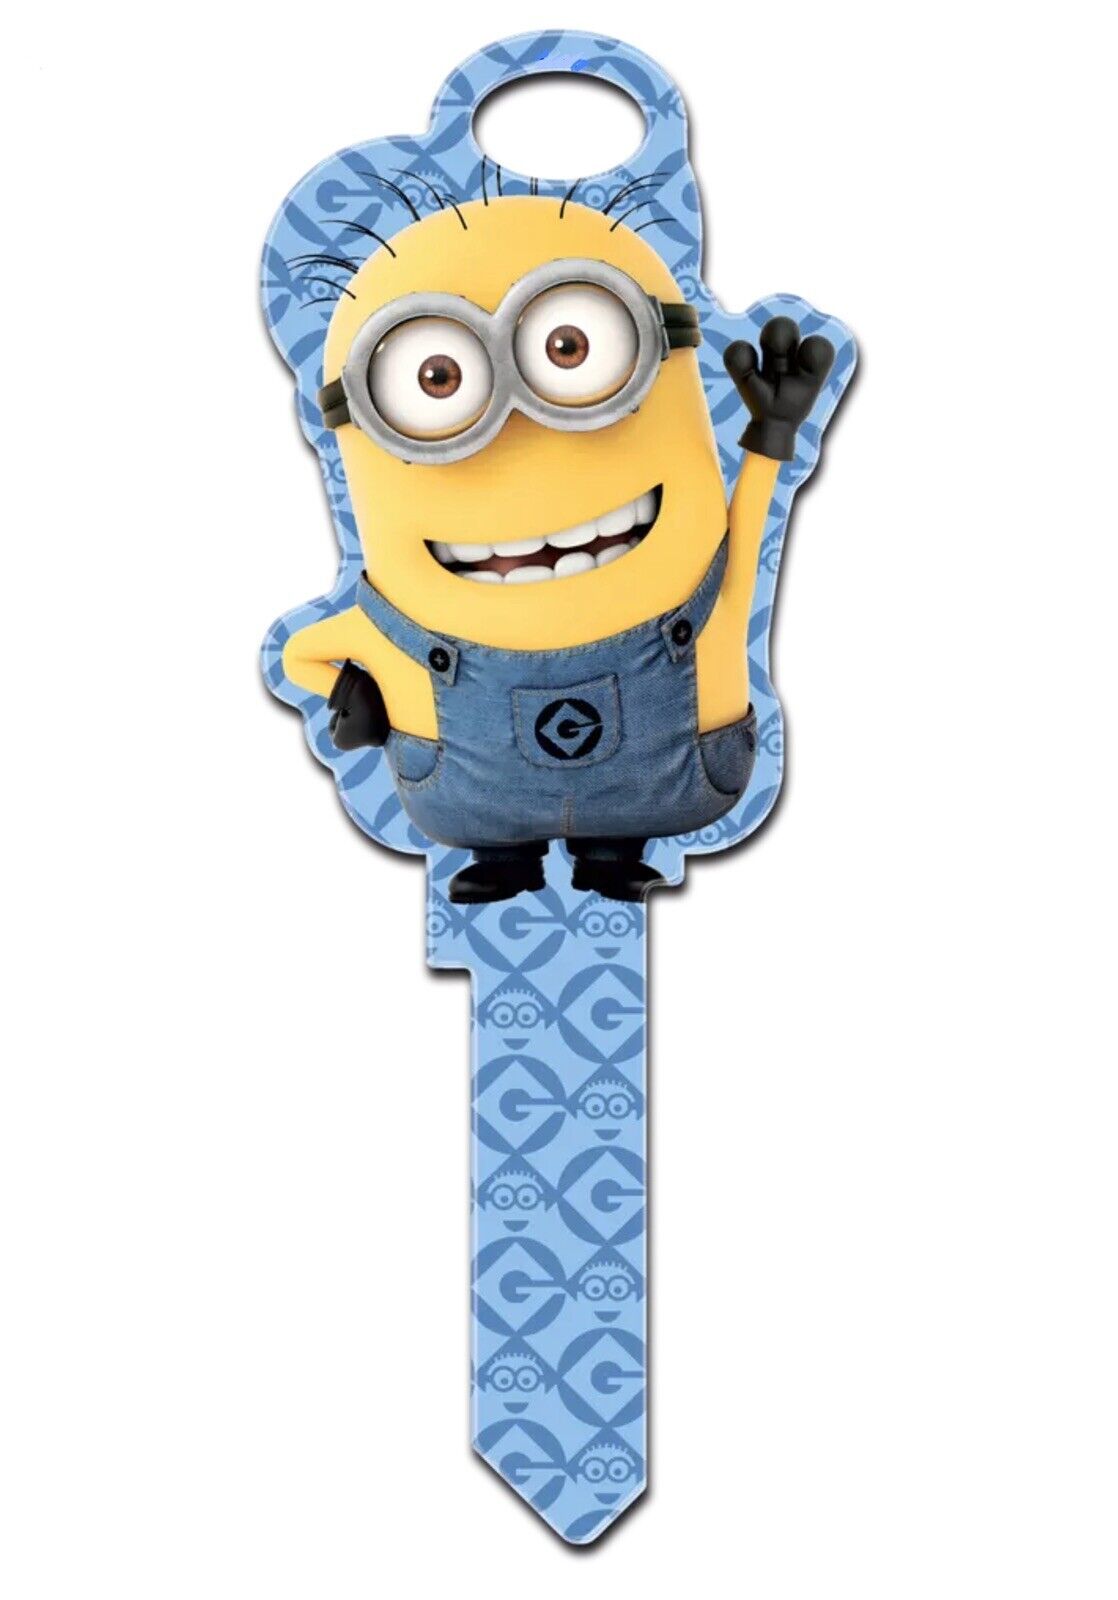 Despicable Me Minion House Key Blank for Kwikset KW1 KW10 KW11 3D Painted Blank